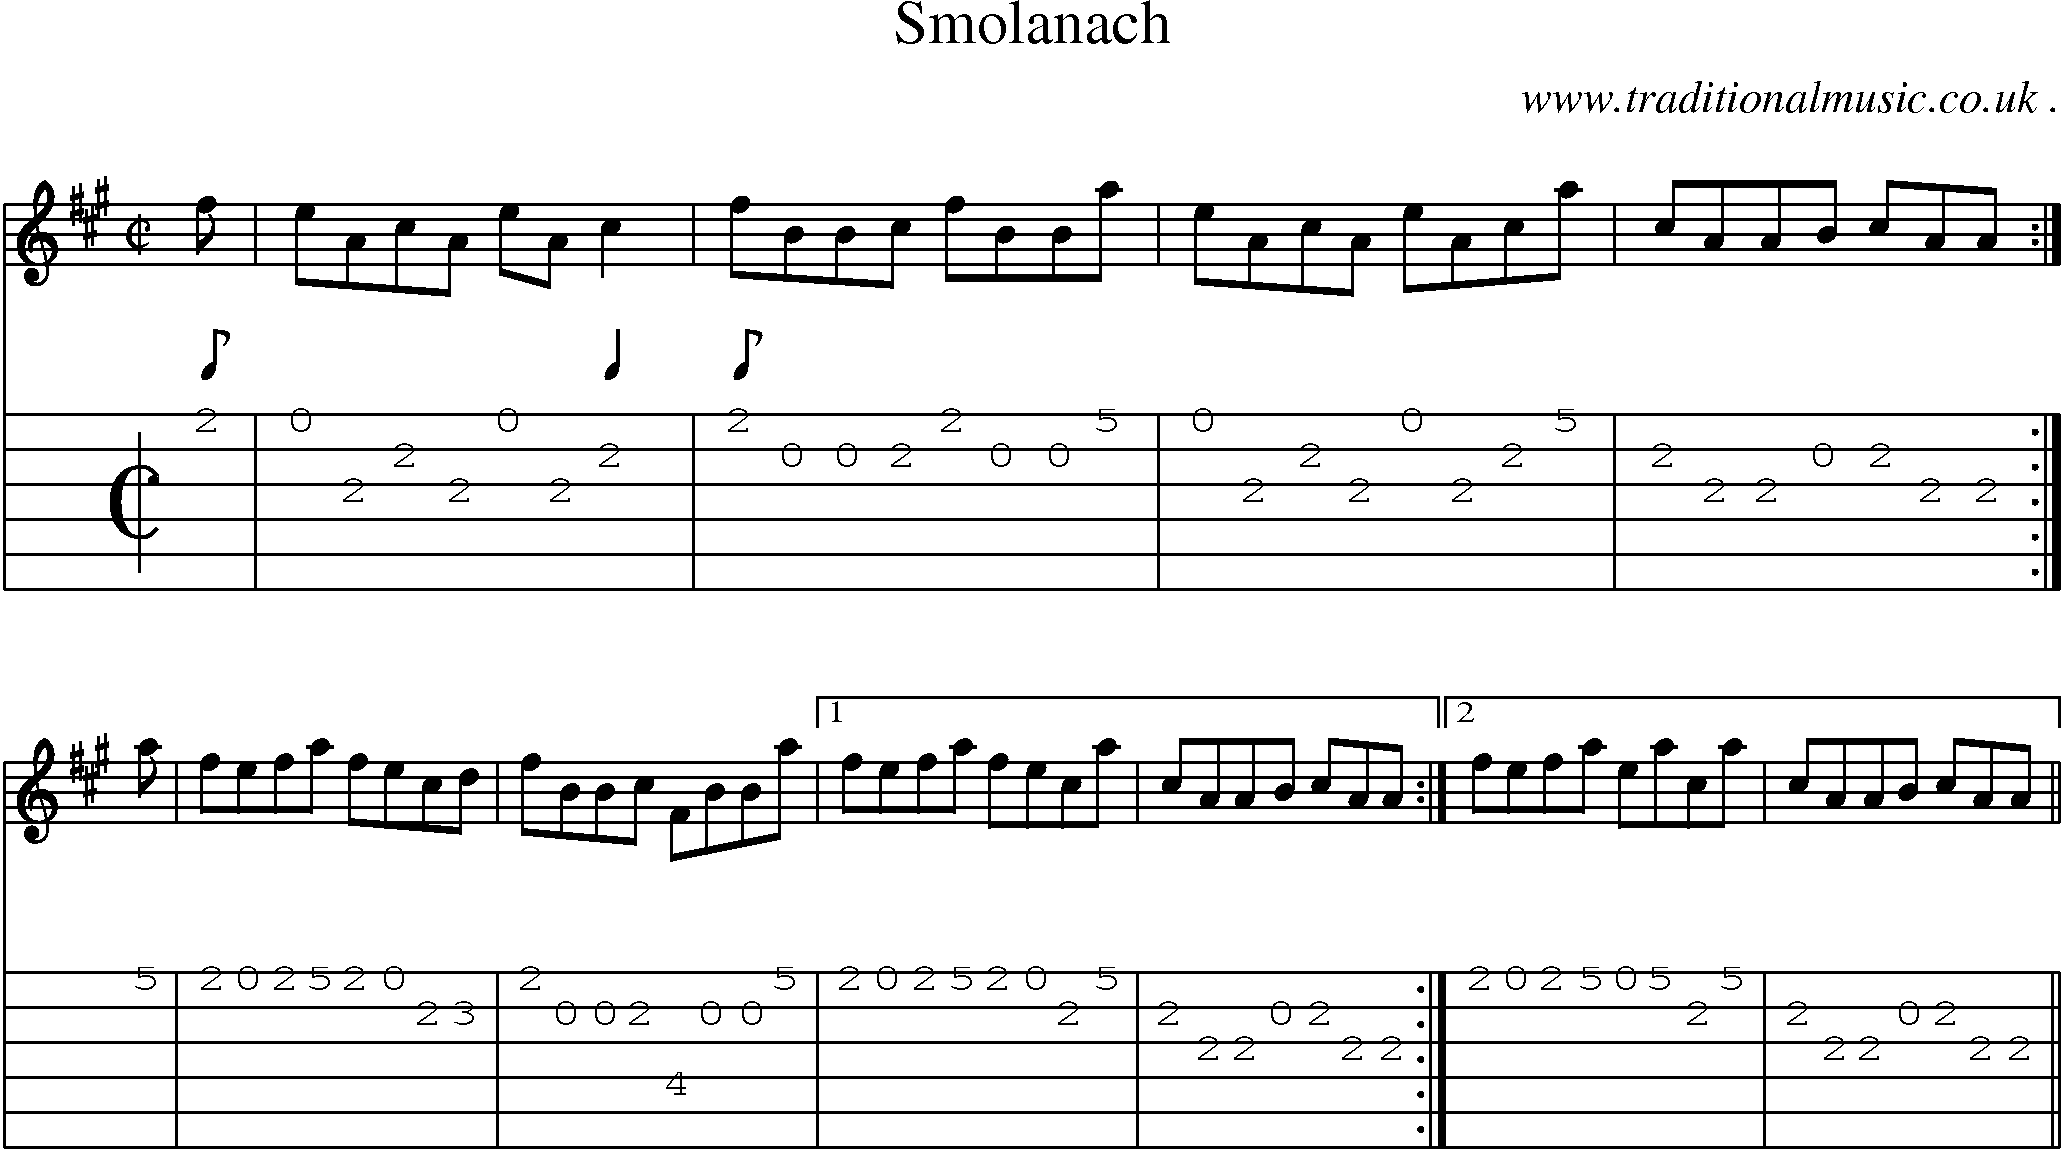 Sheet-music  score, Chords and Guitar Tabs for Smolanach